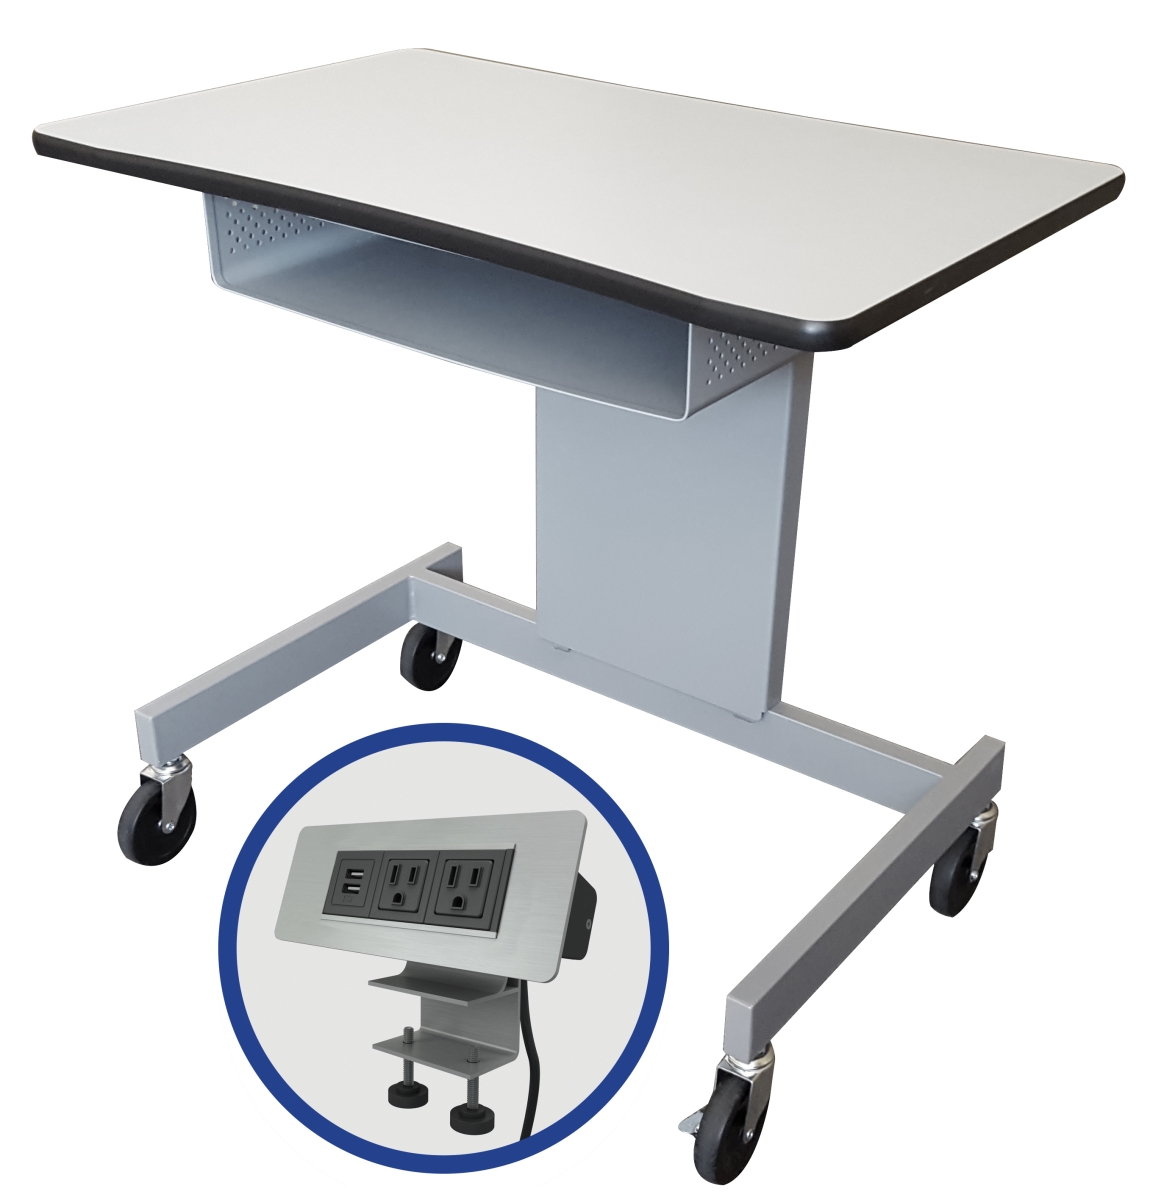 Amwd3220br-plst 32 In. W Ergonomic Adjustable Height Mobile Workstation With Storage Tray